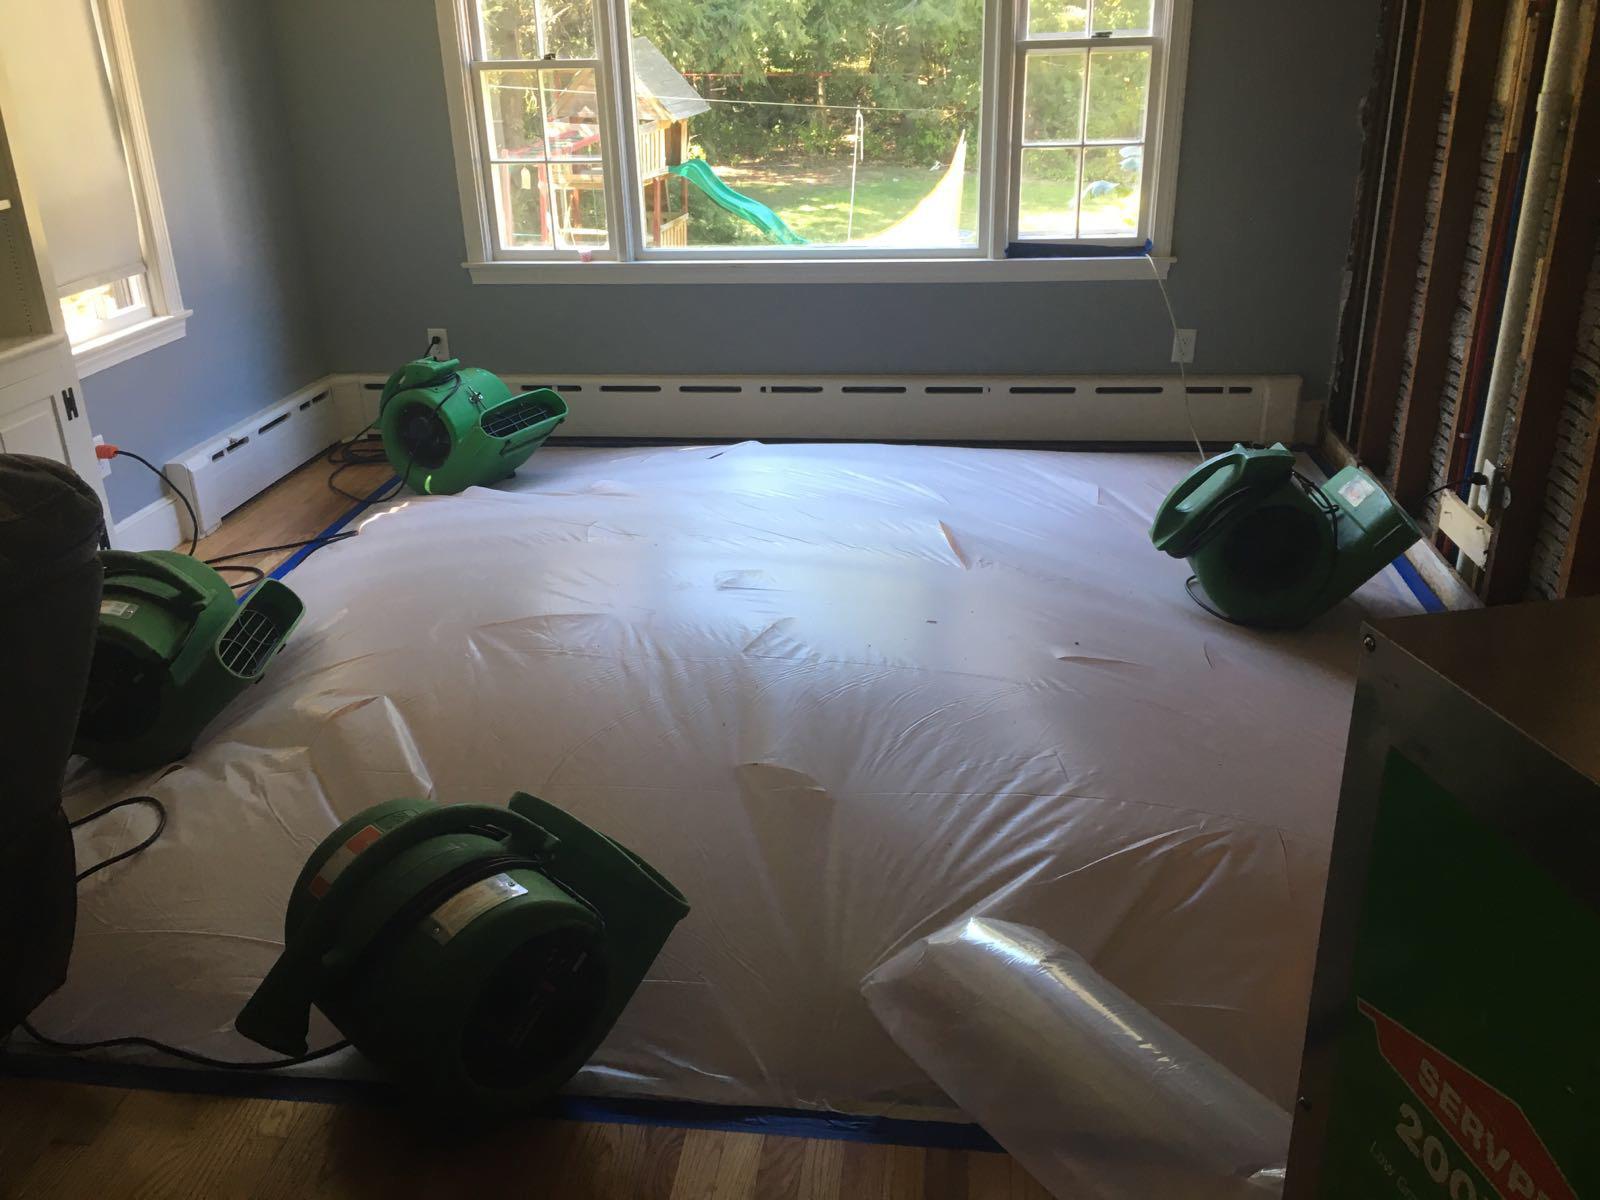 SERVPRO of Providence has the highly trained professionals and advanced equipment to properly restore your property after a water loss.